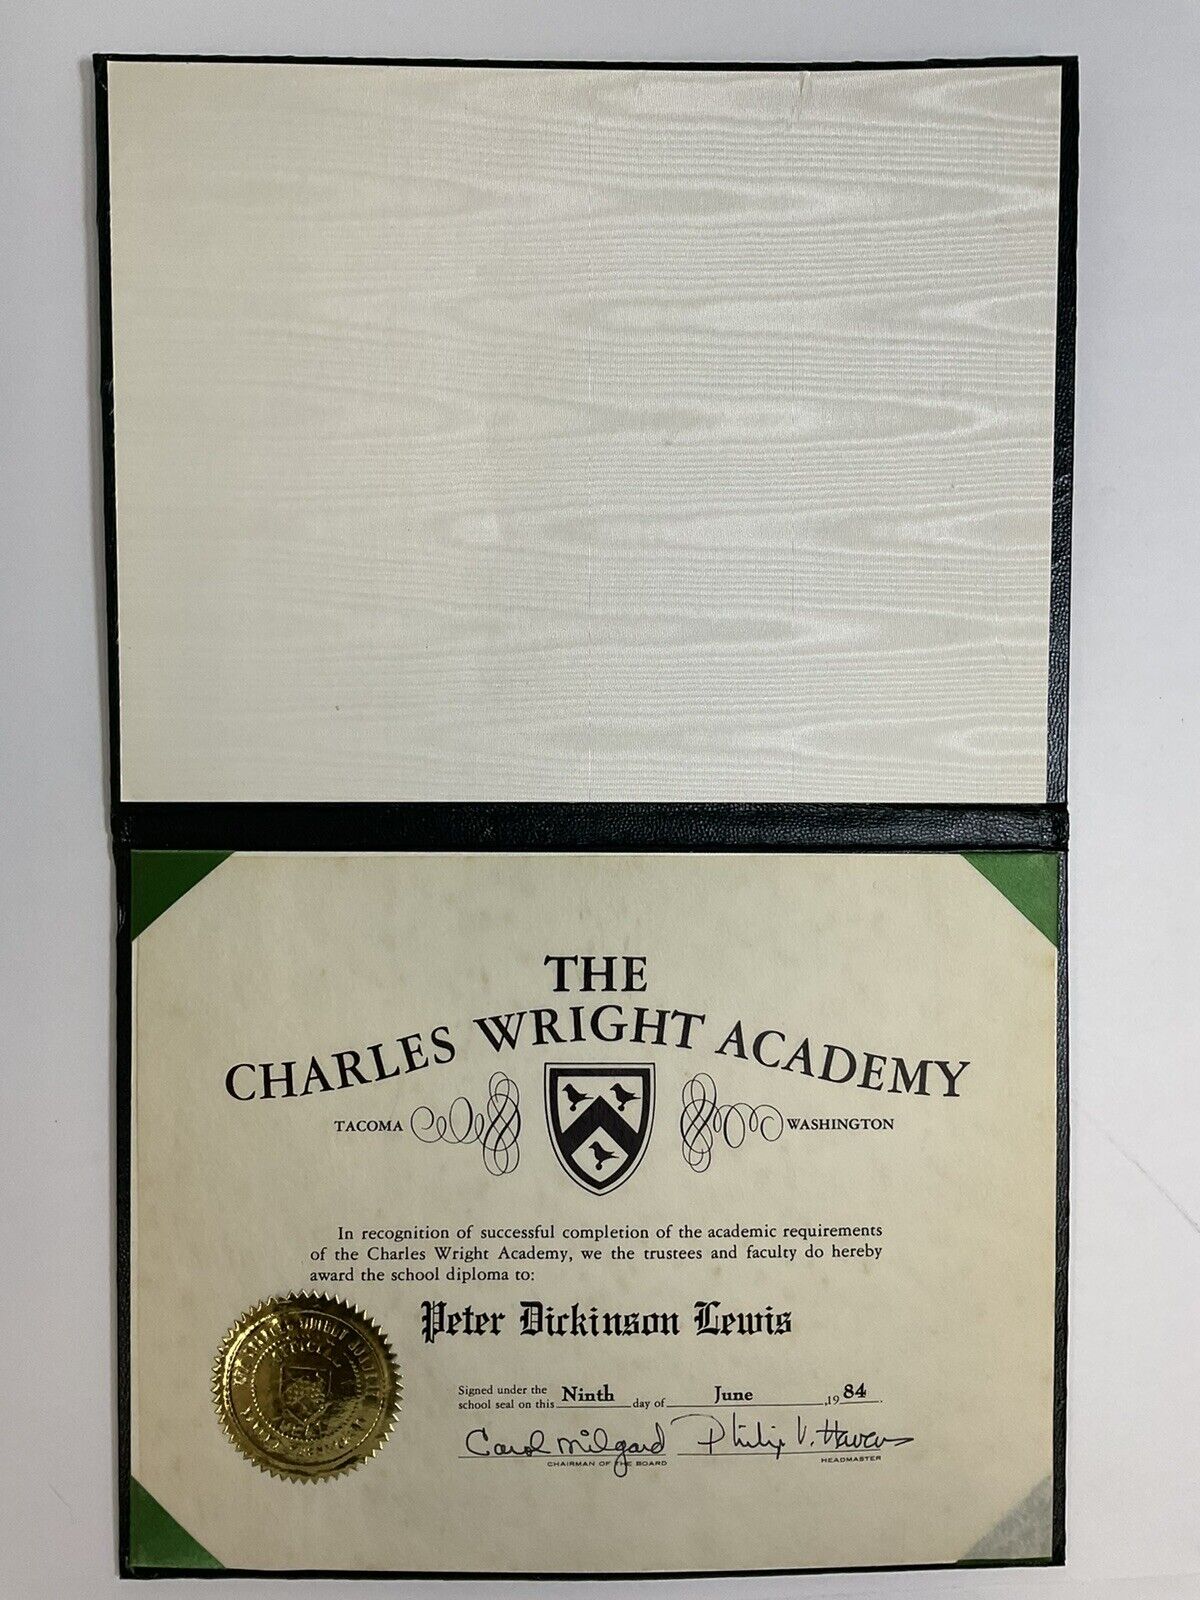 1984 Charles Wright Academy Diploma Peter Dickinson Lewis  OldYearbookShopCom